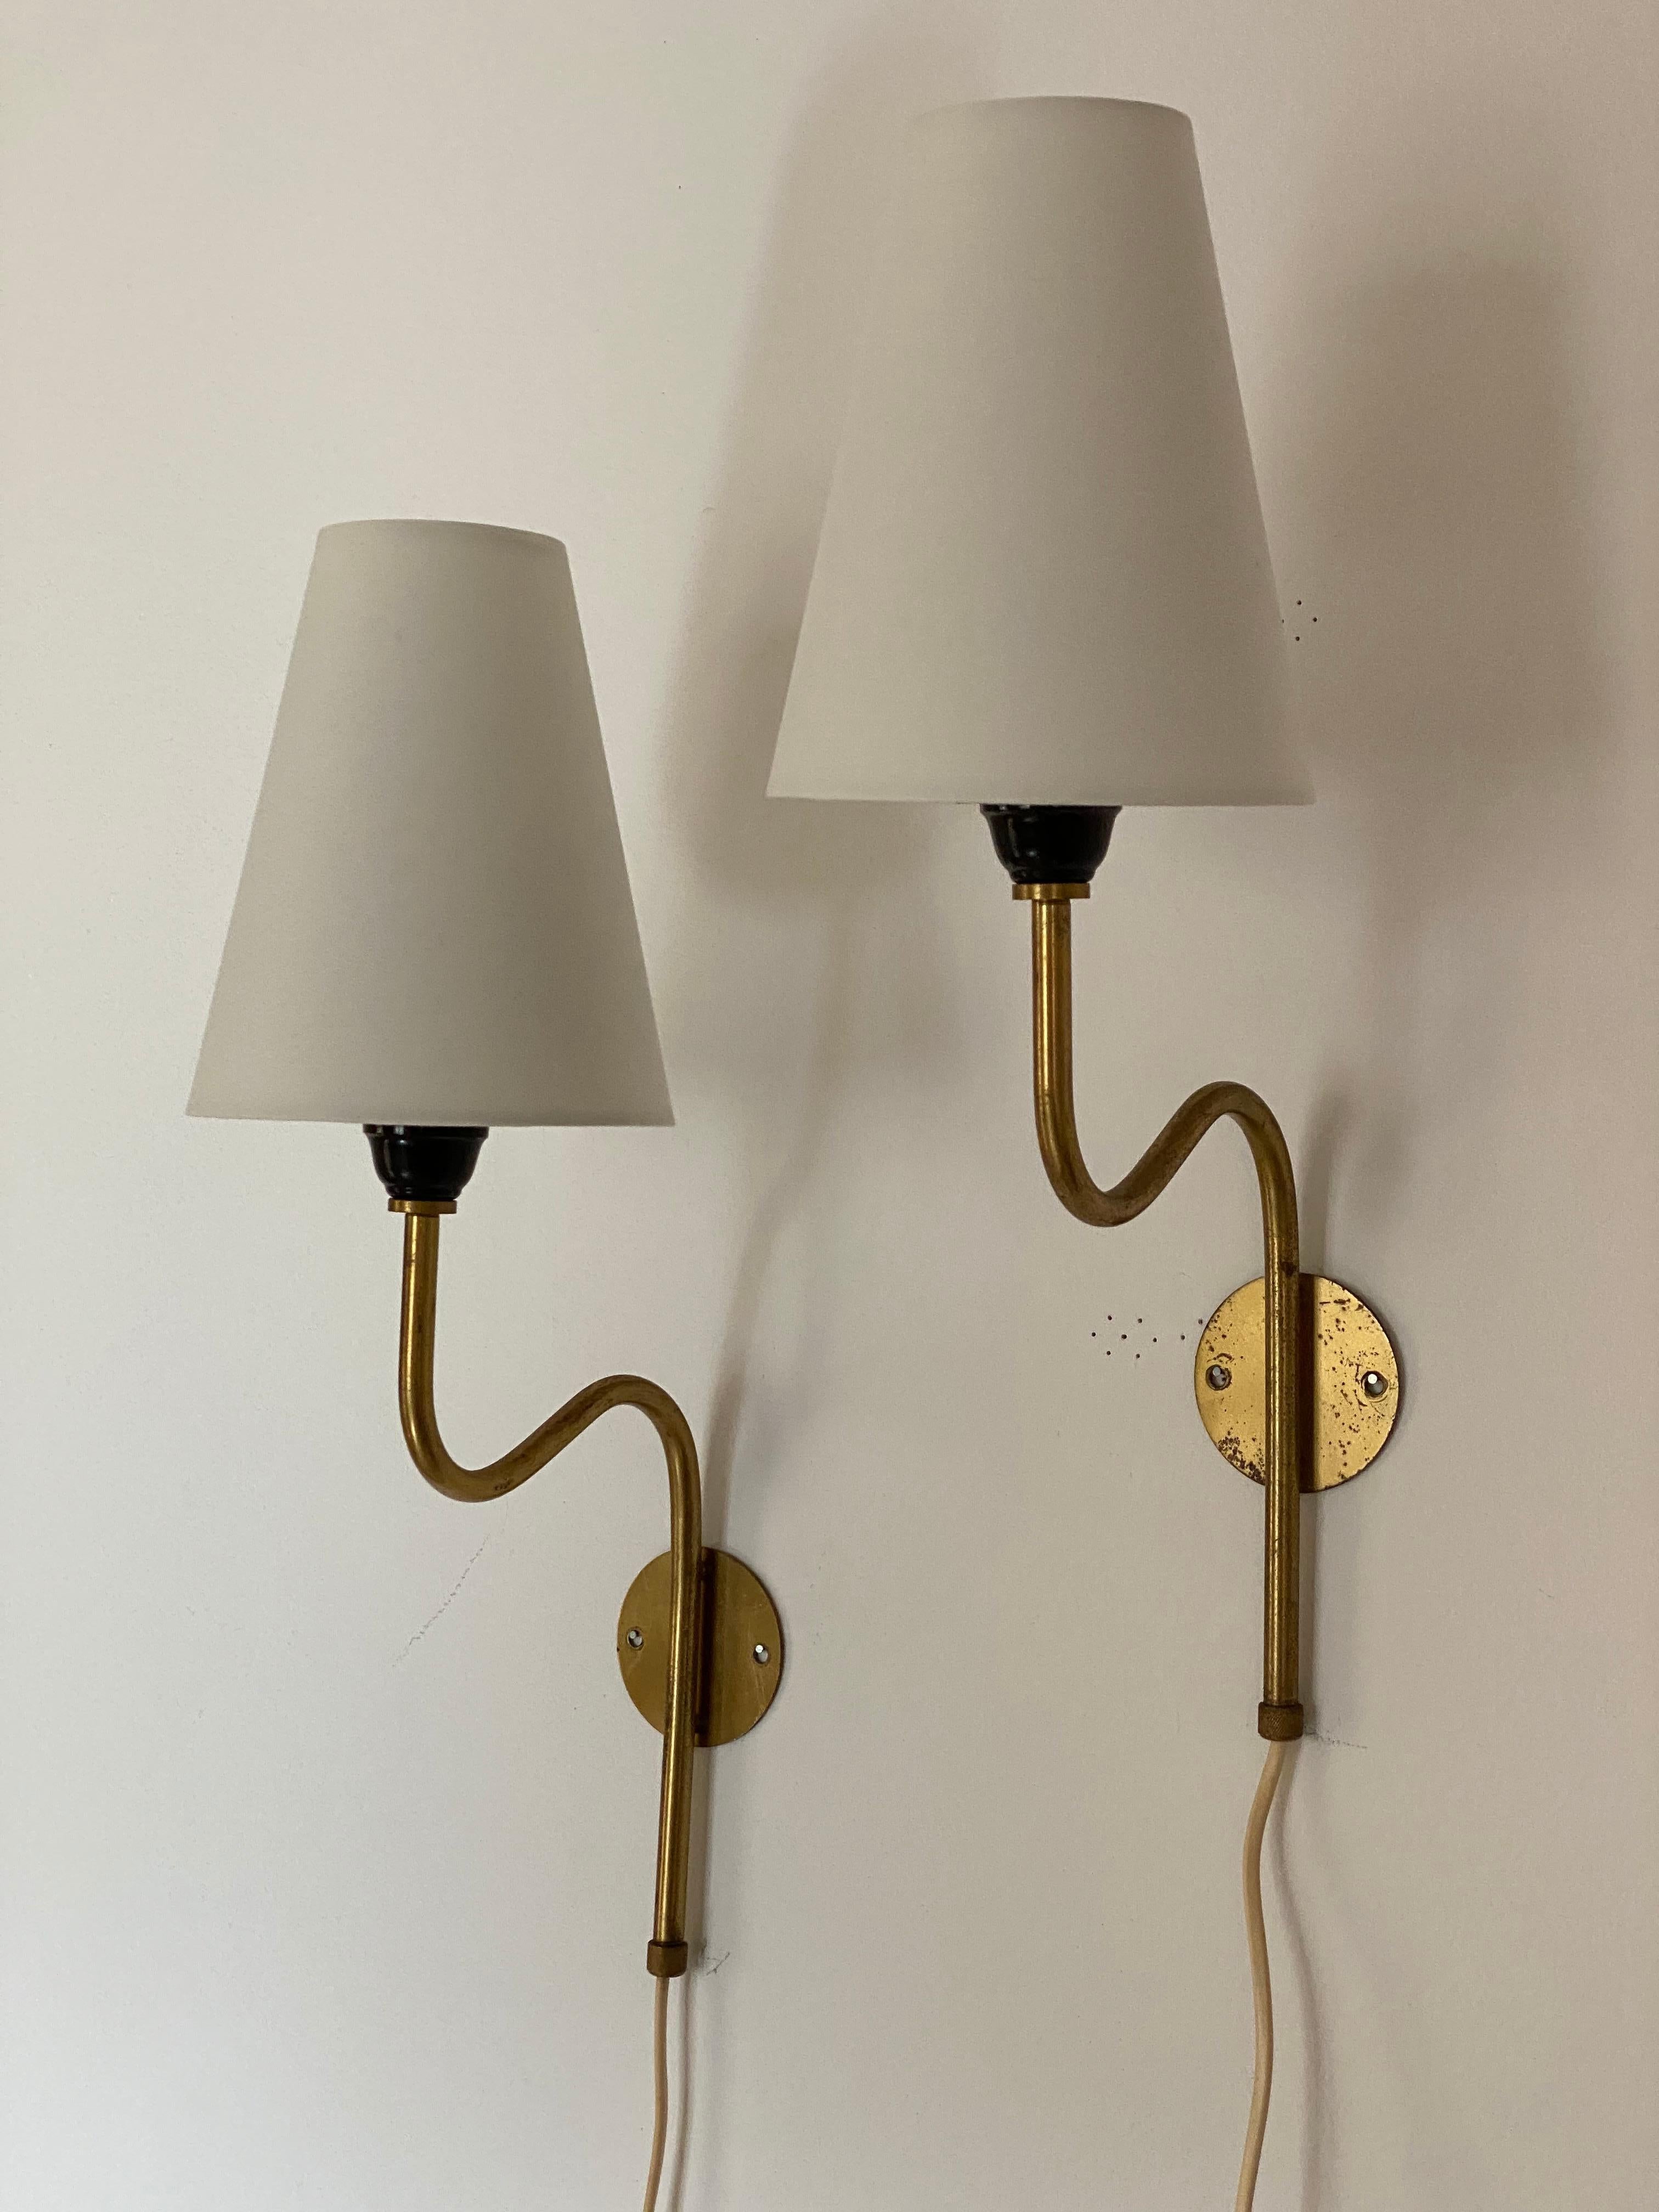 A pair of organic wall lamps / sconces. Designed and produced in Sweden, 1940s. Brand new high-end lampshades. 

Other designers of the period include Paavo Tynell, Hans Bergström, Hans Agne Jakobsson, Alvar Aalto, and Lisa Johansson-Pape.